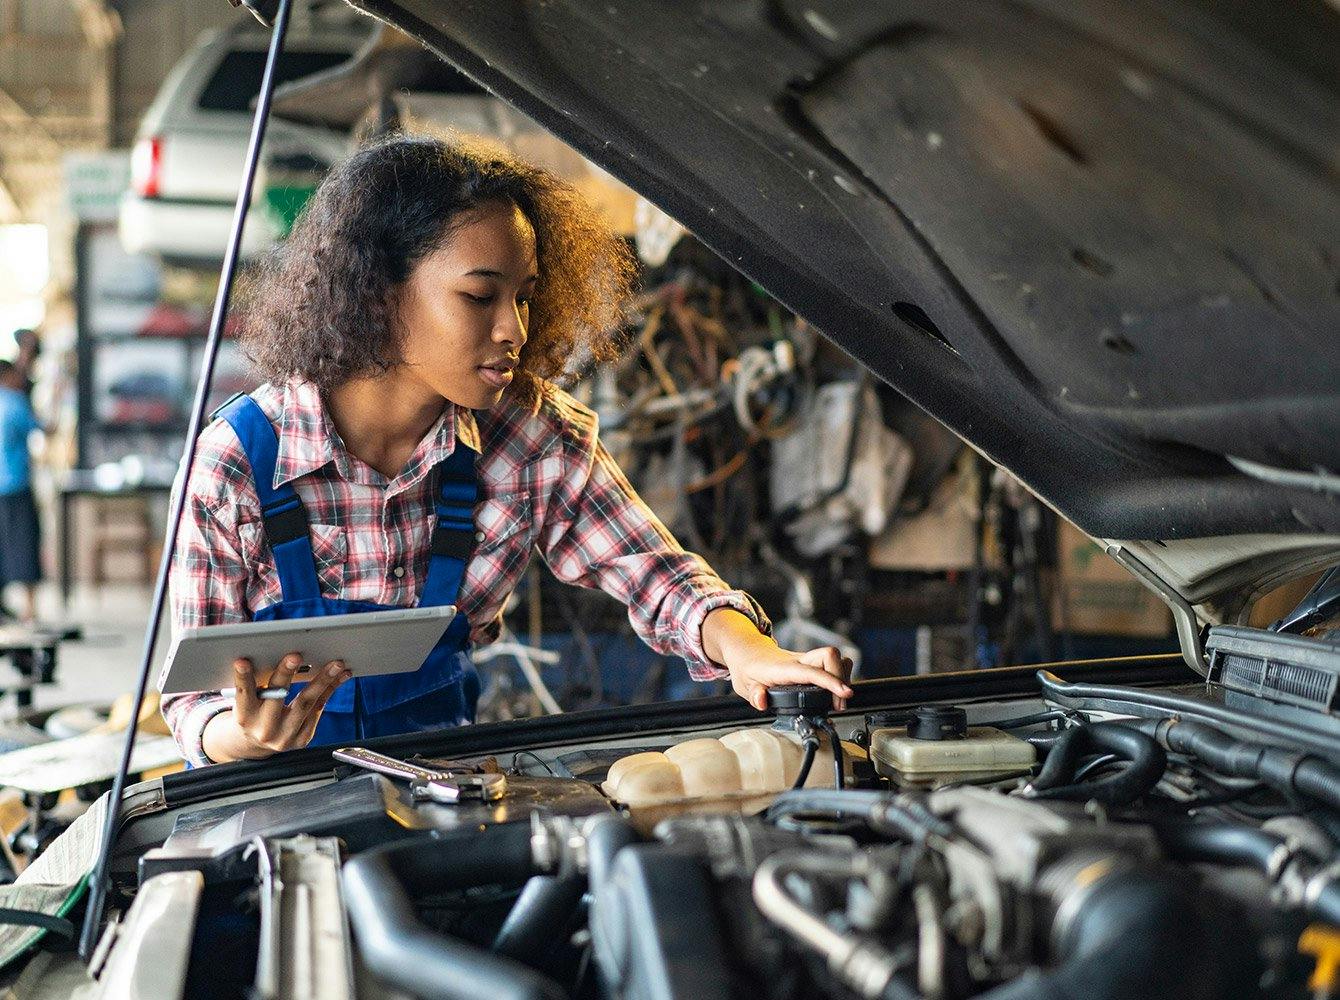 A woman with a tablet is working under the hood of a car